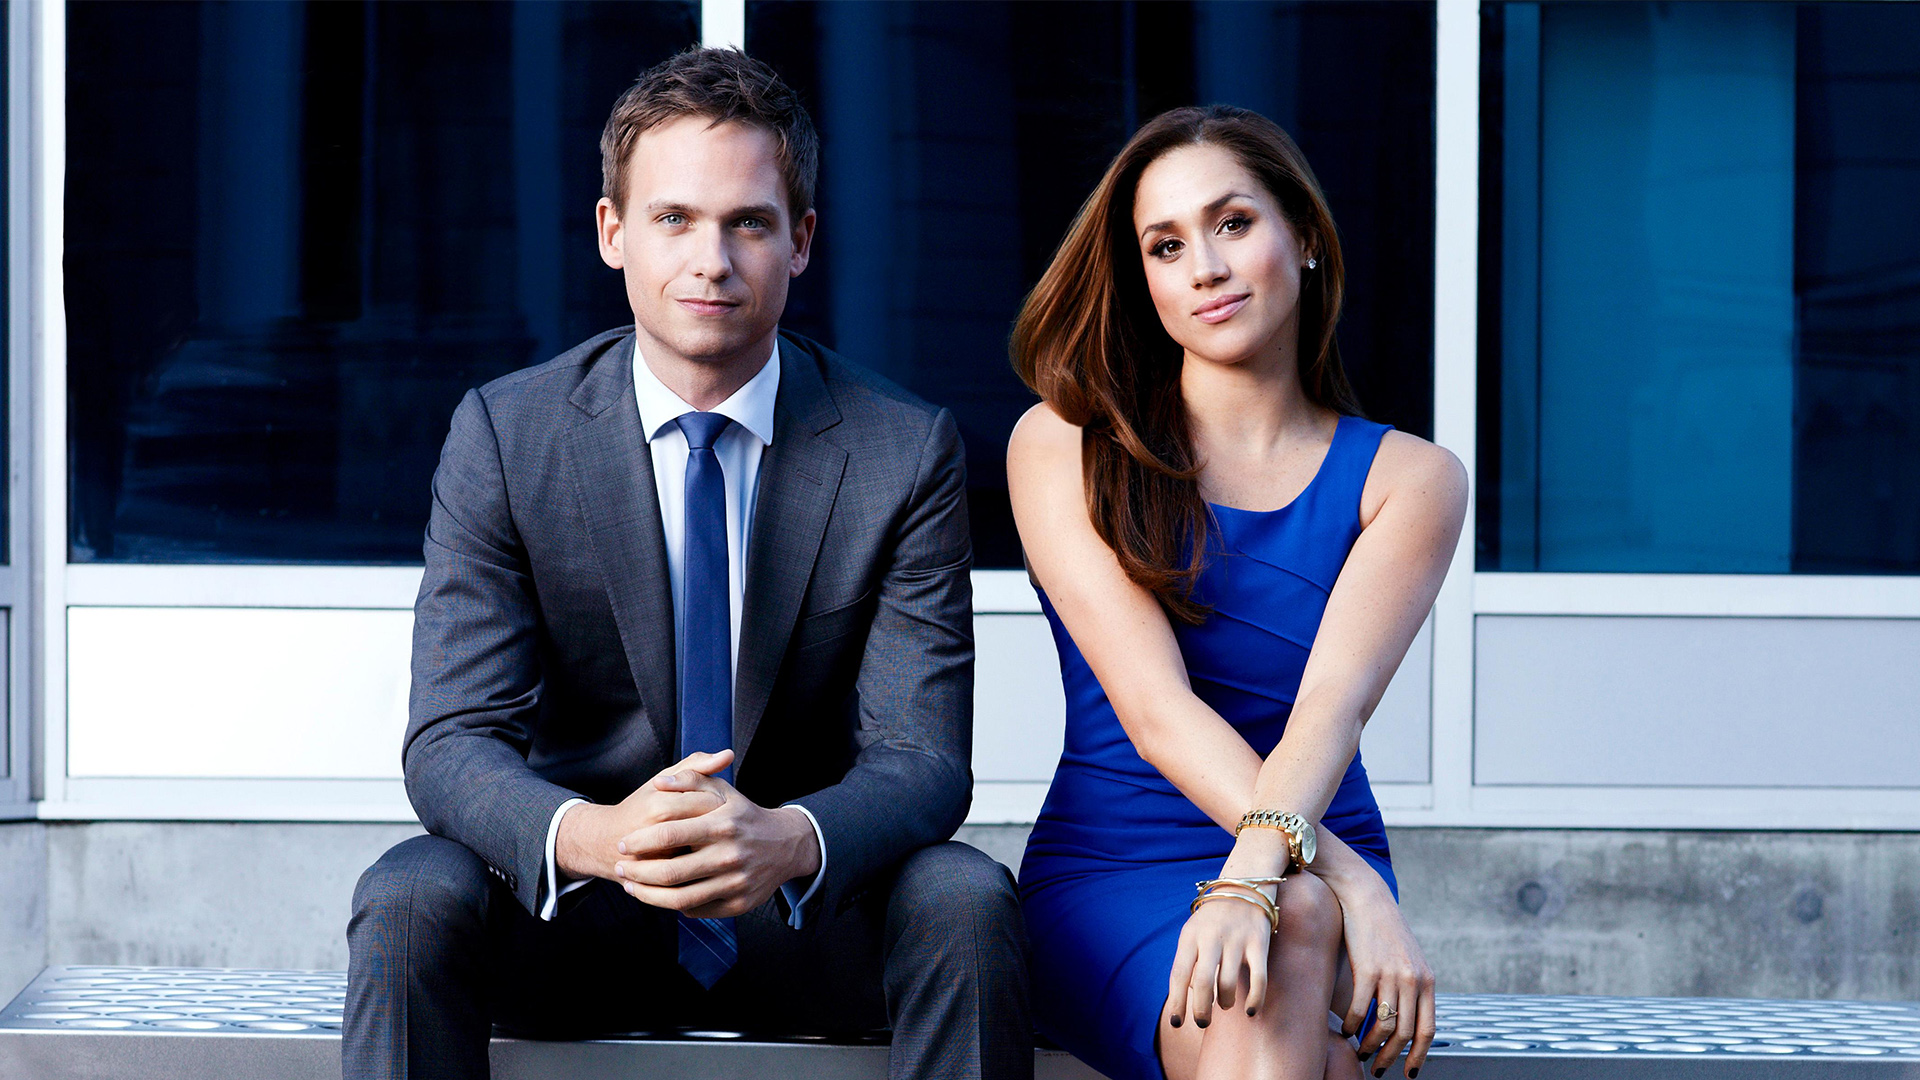 Suits TV series Wallpapers   Wallpaper High Definition High Quality